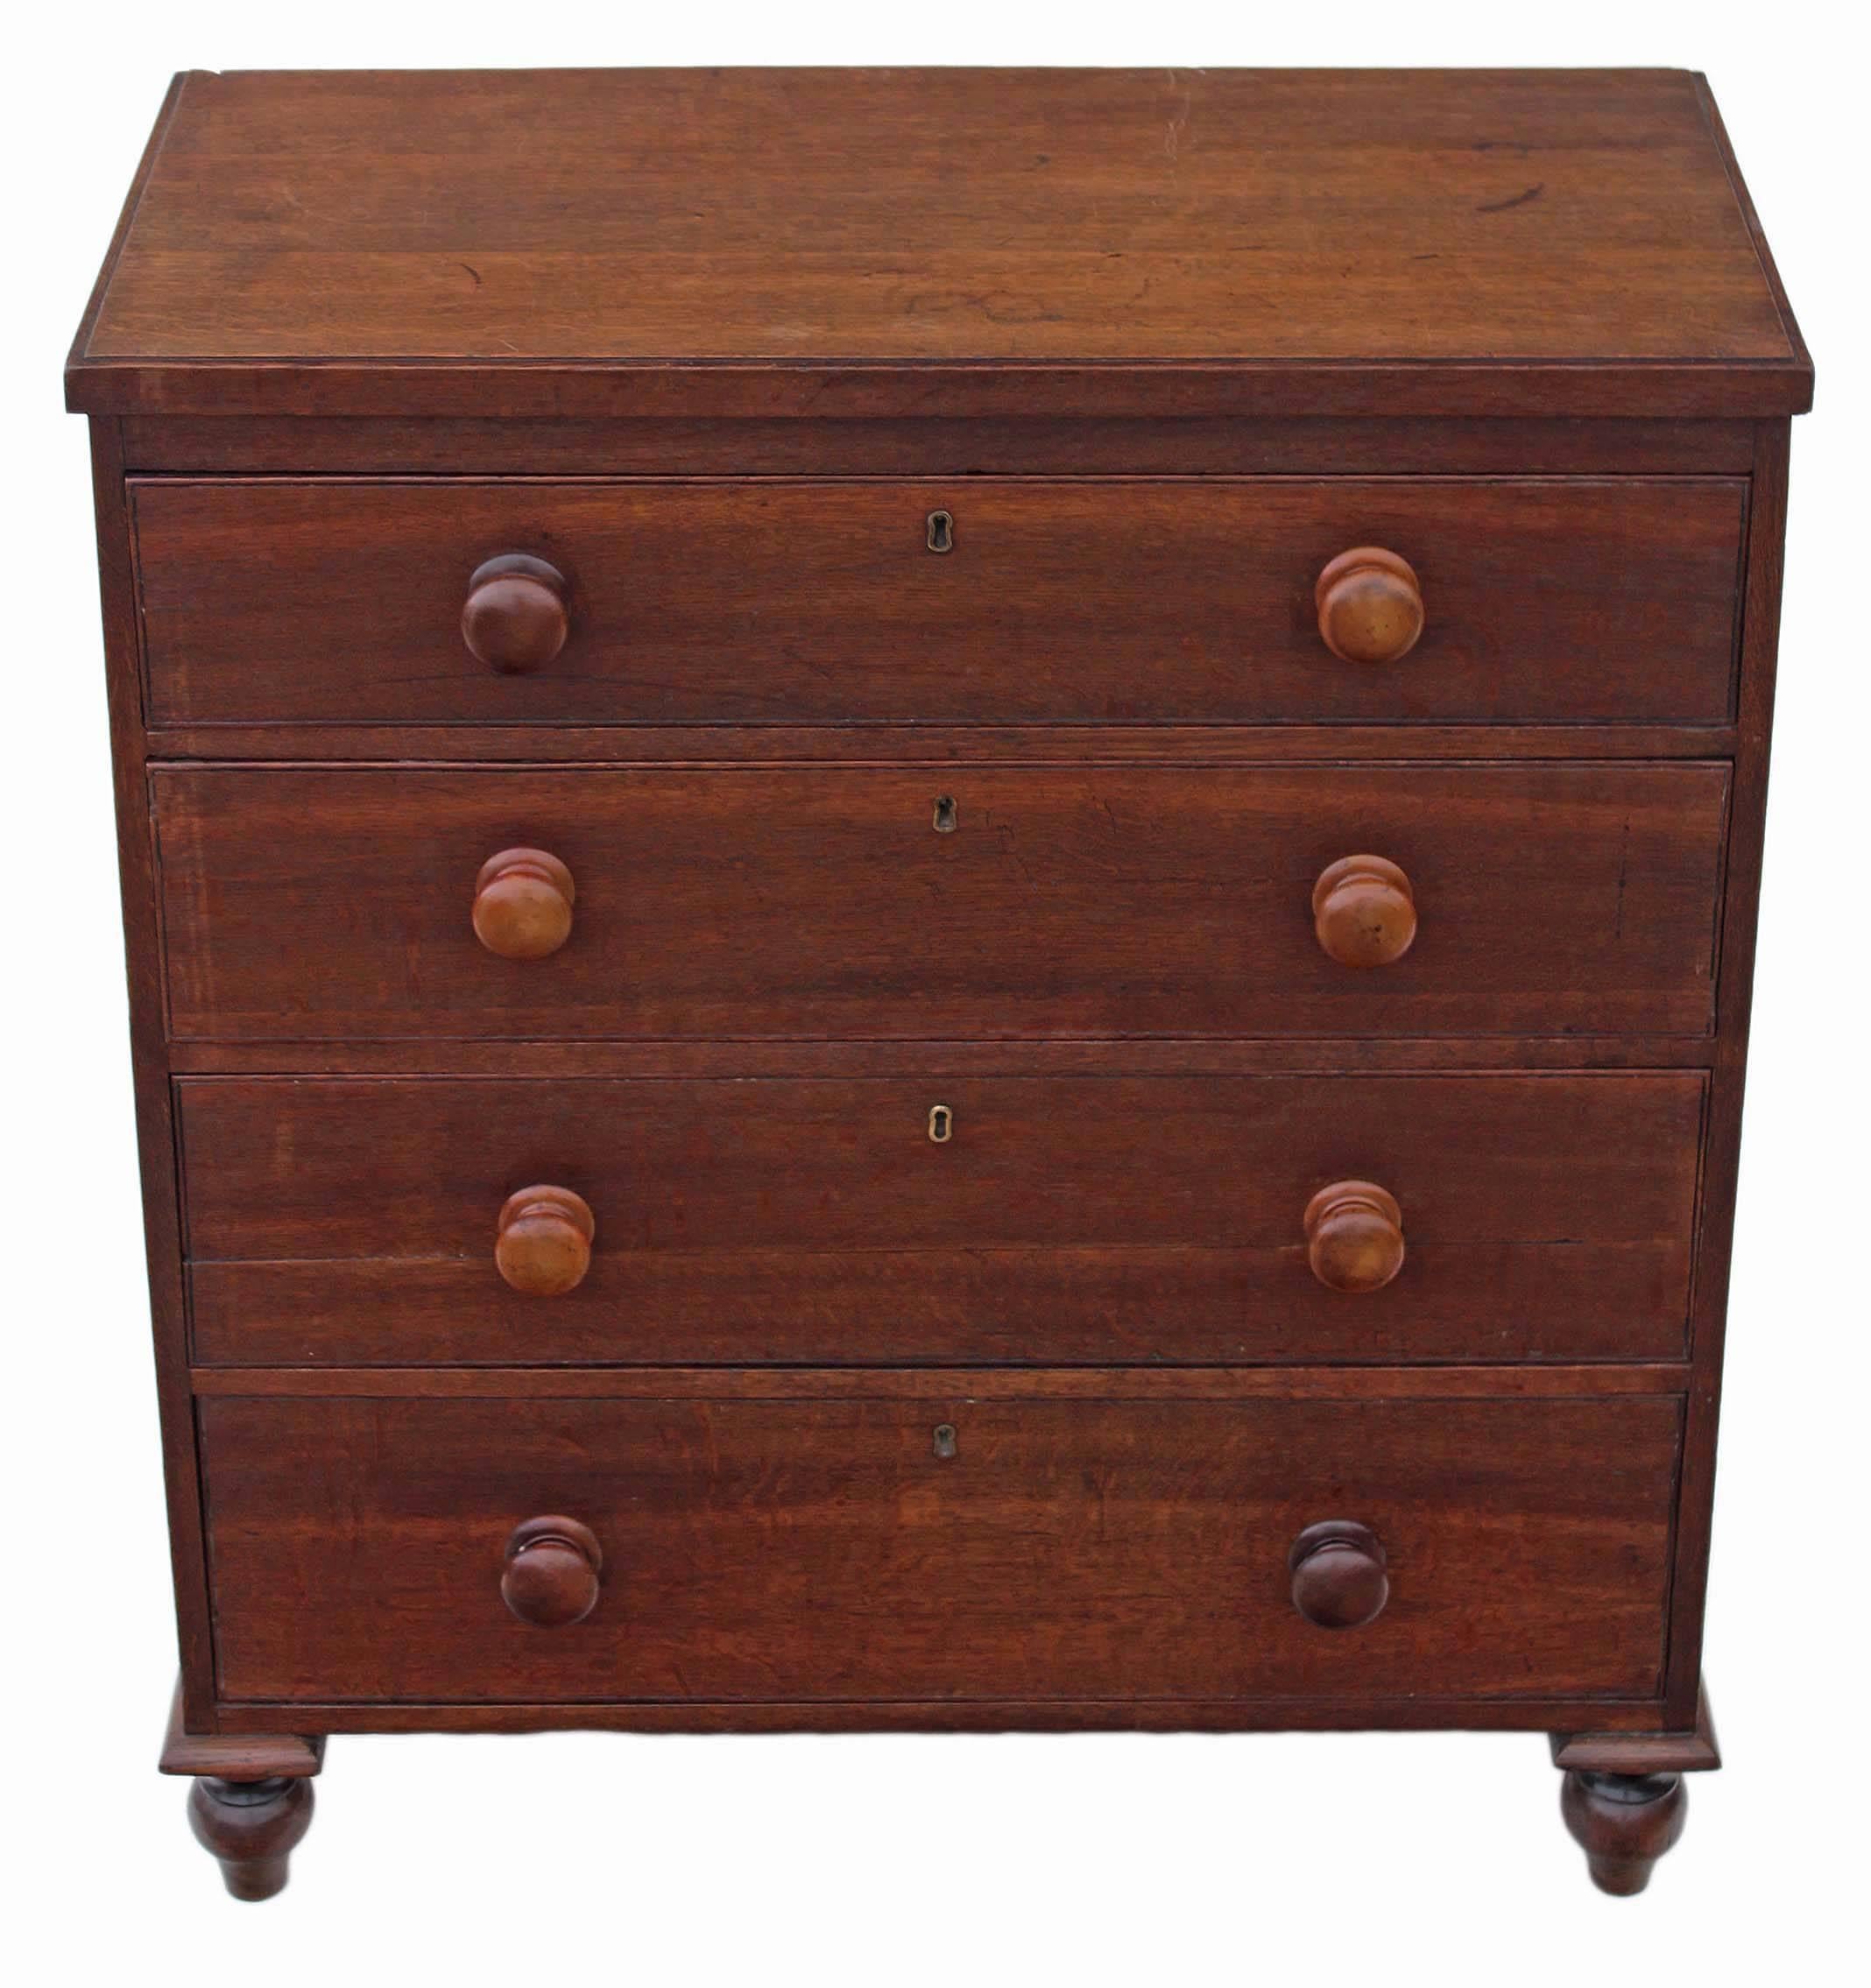 Antique early Victorian 19th century oak chest of drawers.

This is a lovely chest, that is full of age, charm and character.

Fantastic mellow oak color, with what appears to be the original handles and locks (no key).

The drawers slide